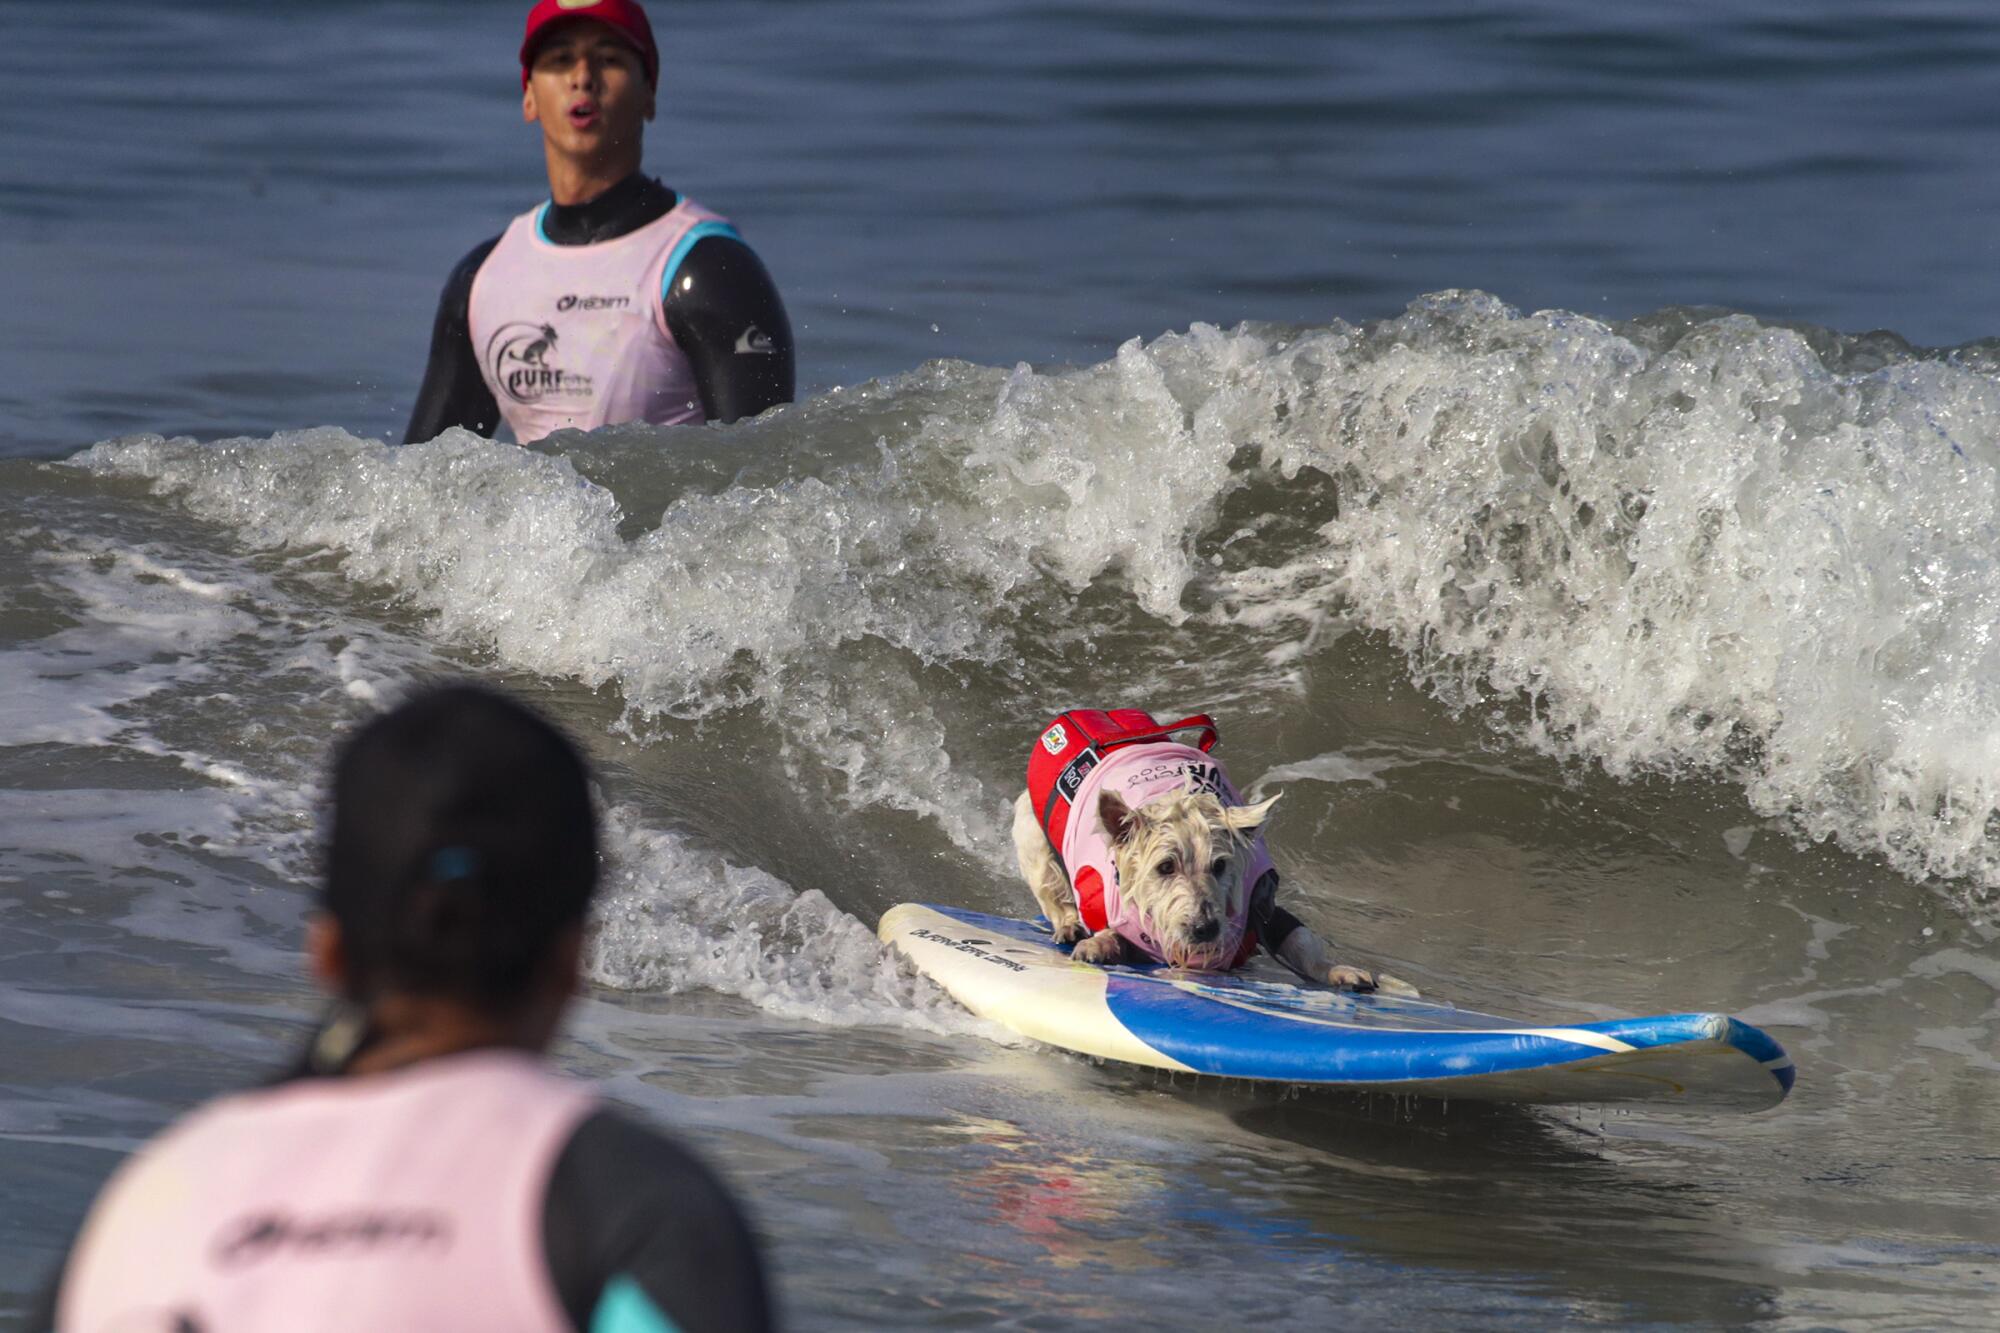 Migz Berenguel watches as Petey, a West Highland terrier, rides a wave.